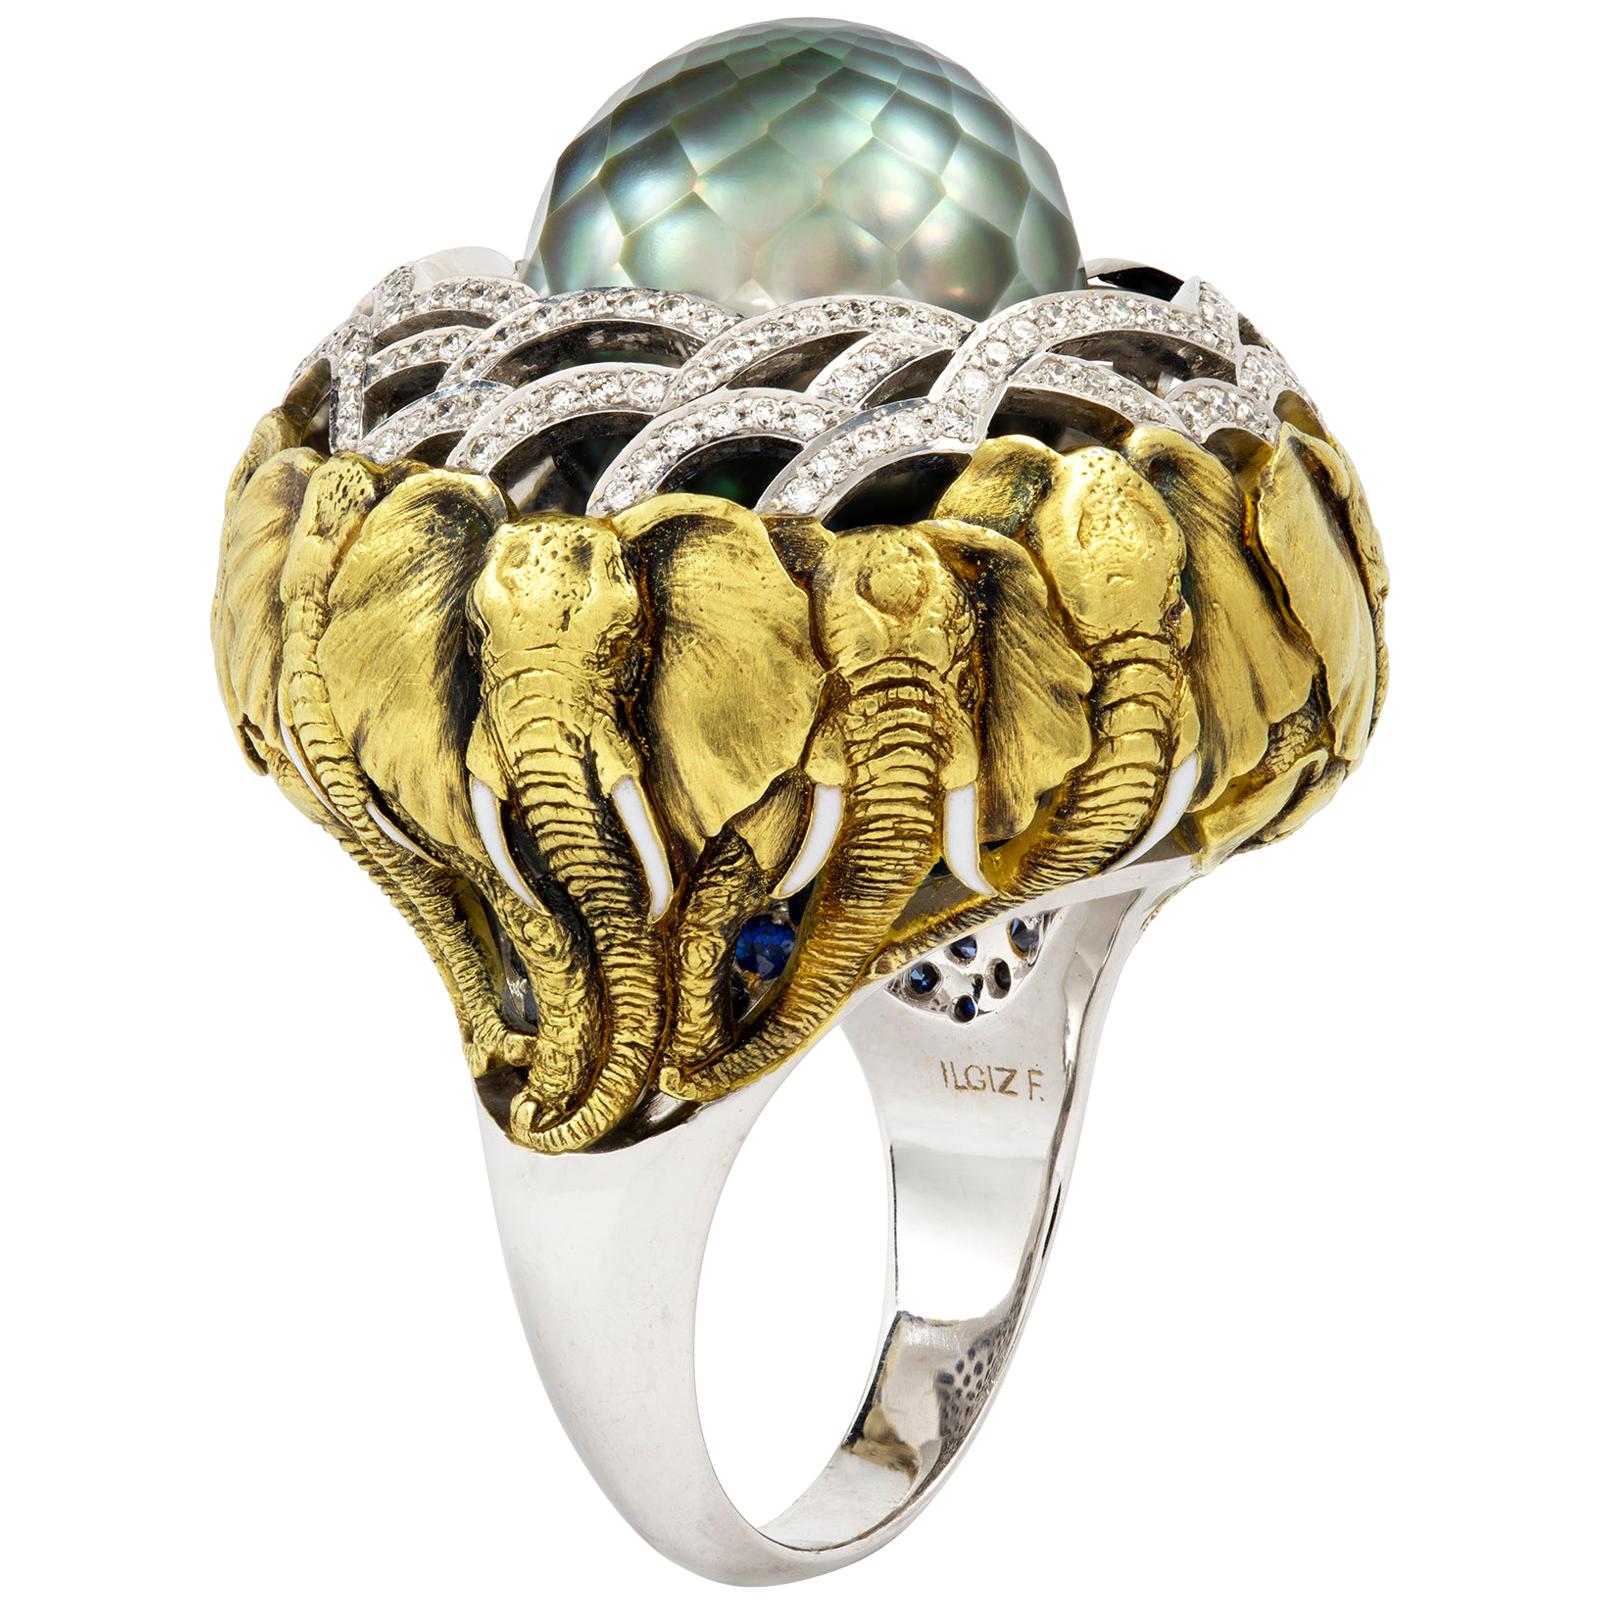 Ring with Elephants by Ilgiz F For Sale